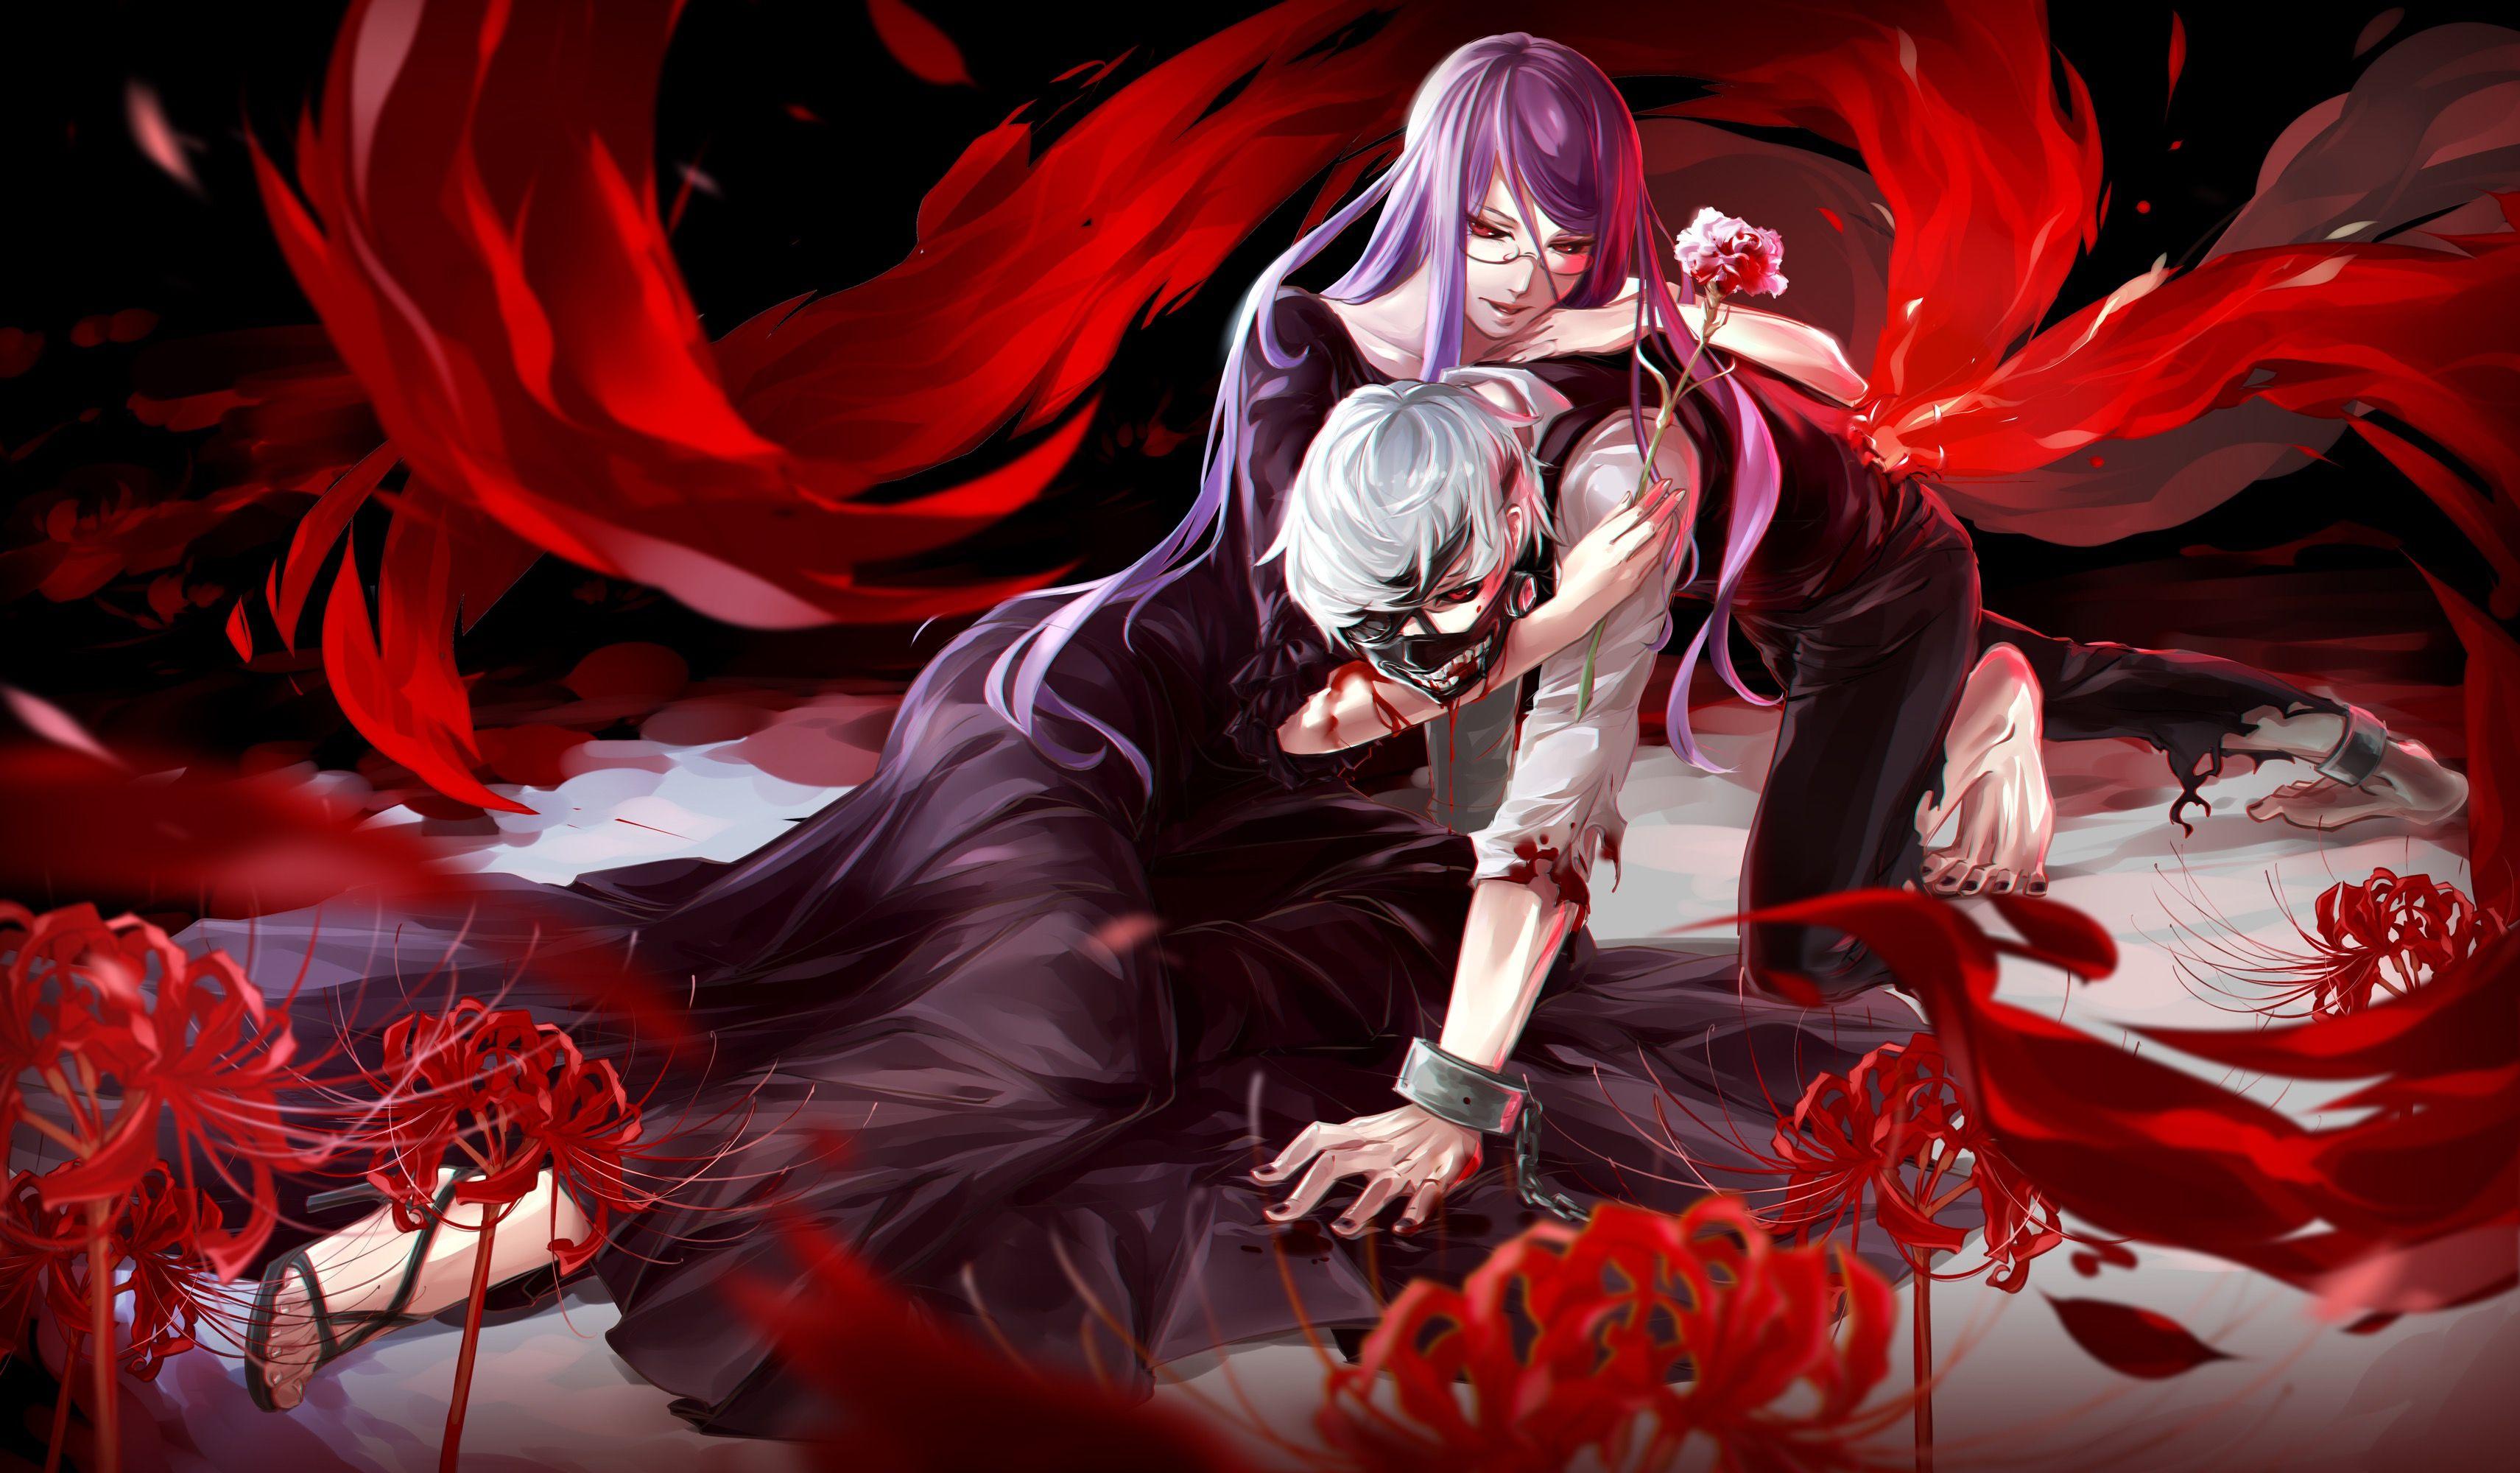 Horror n Gore Anime Images  Icons Wallpapers and Photos on Fanpop